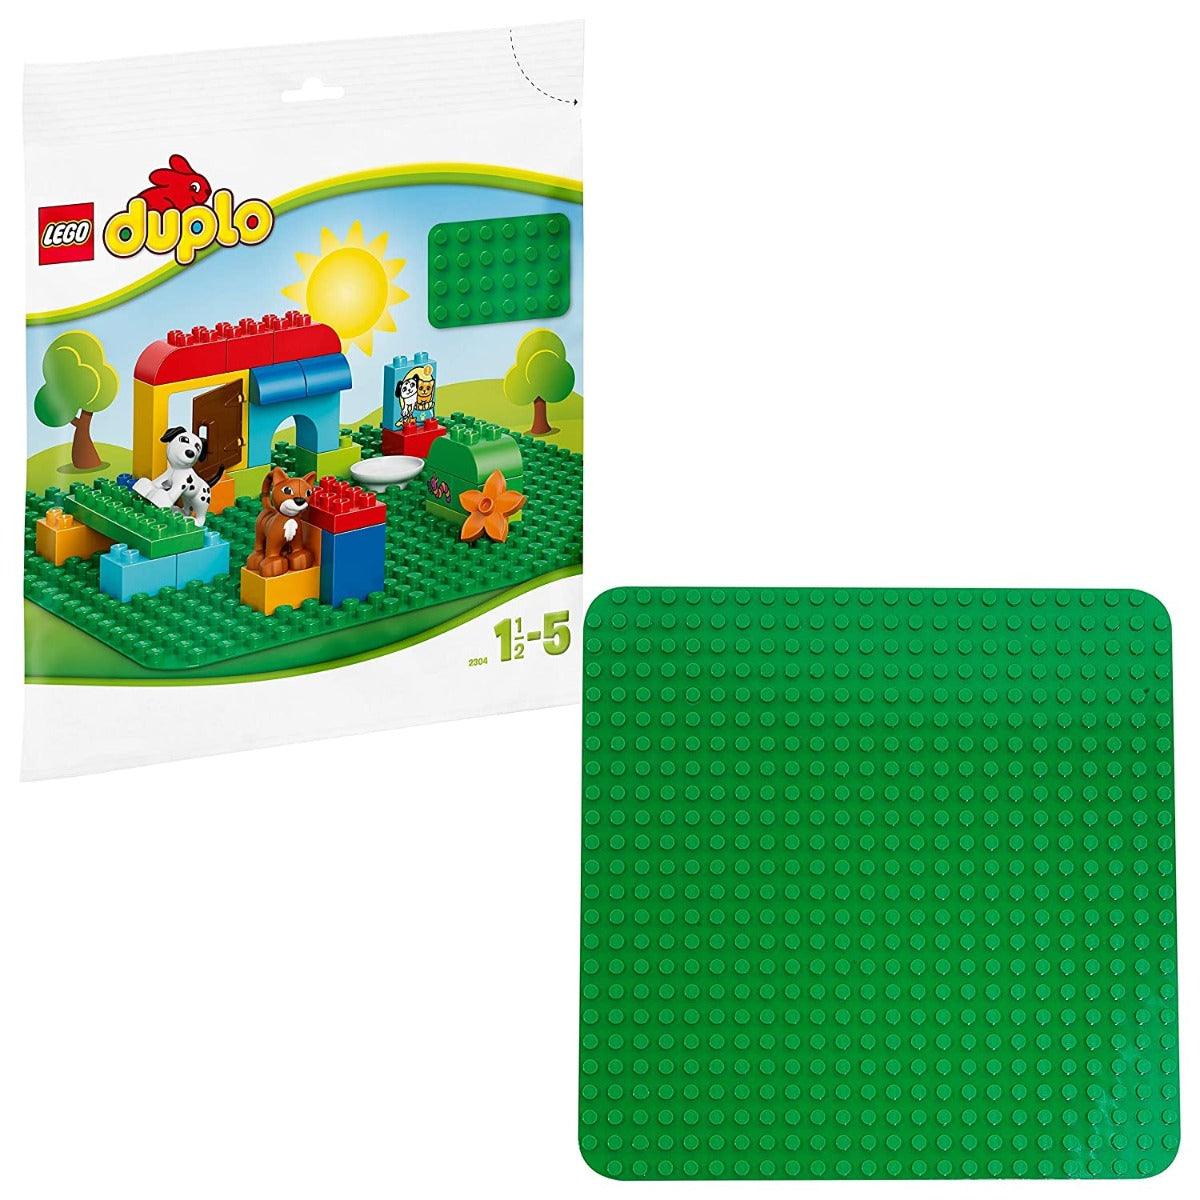 LEGO Duplo Large Green Building Plate